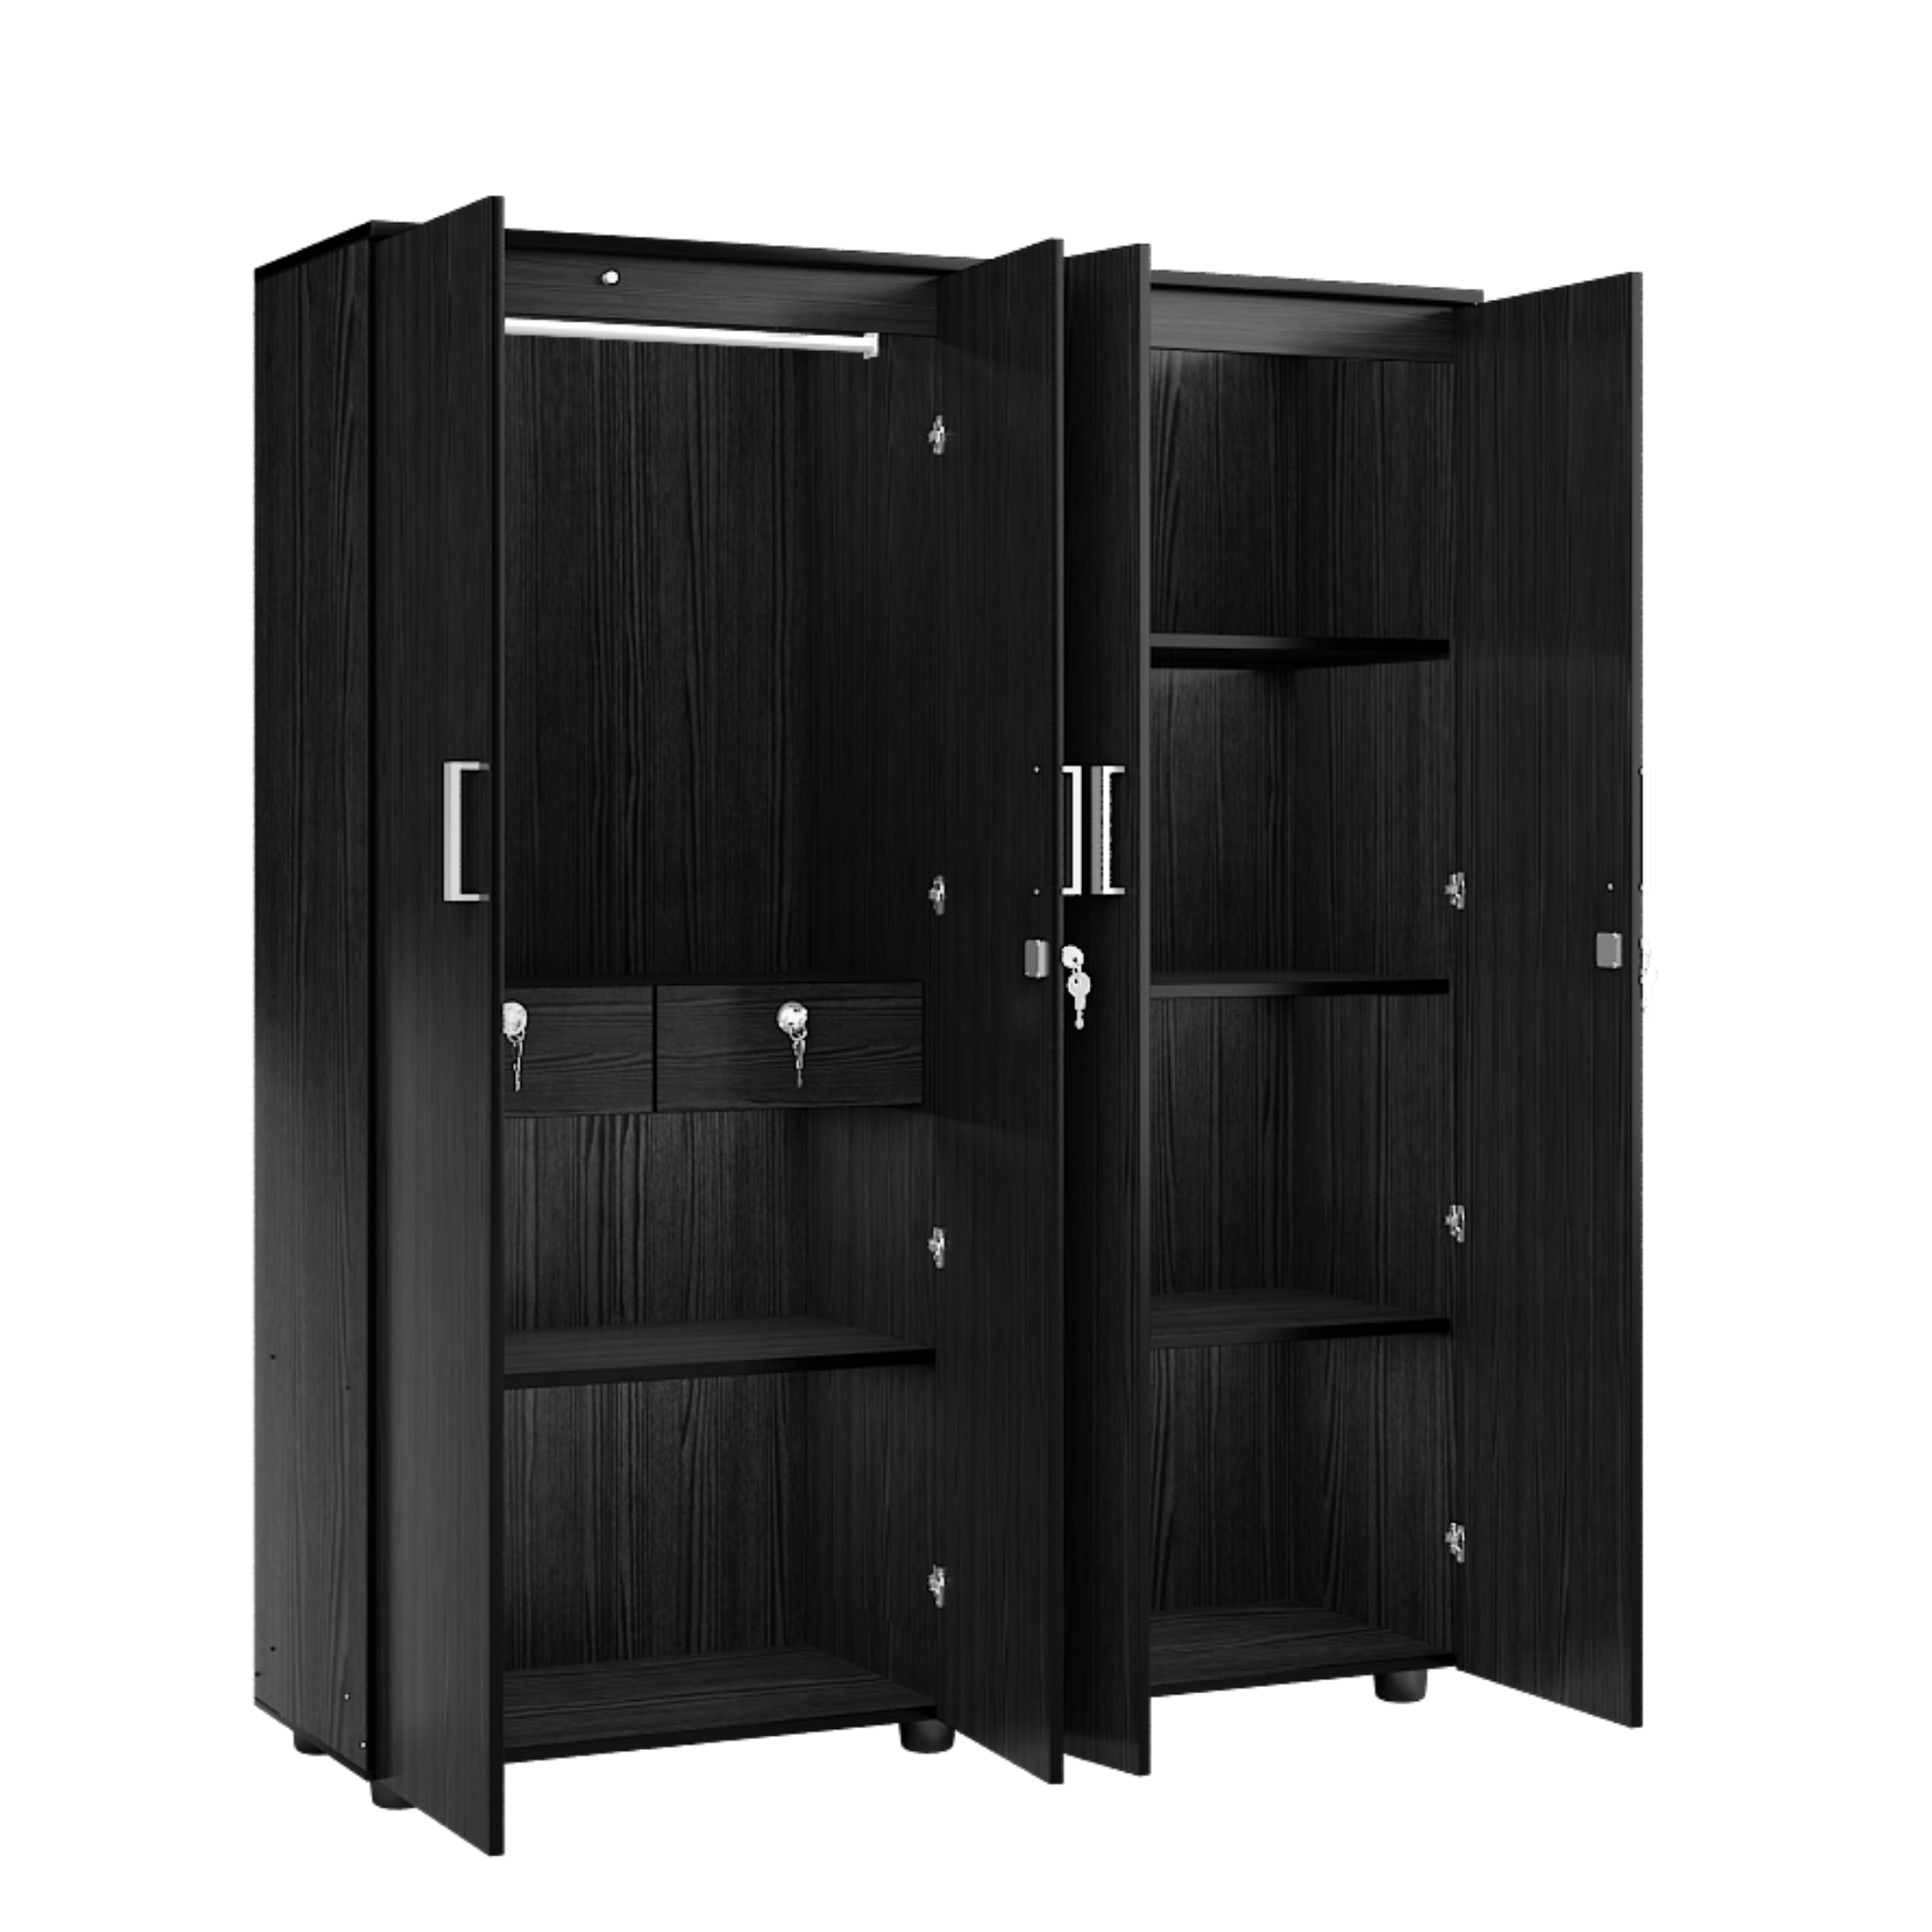 Super and Luxury Four Door Wardrobe with Dual Drawer